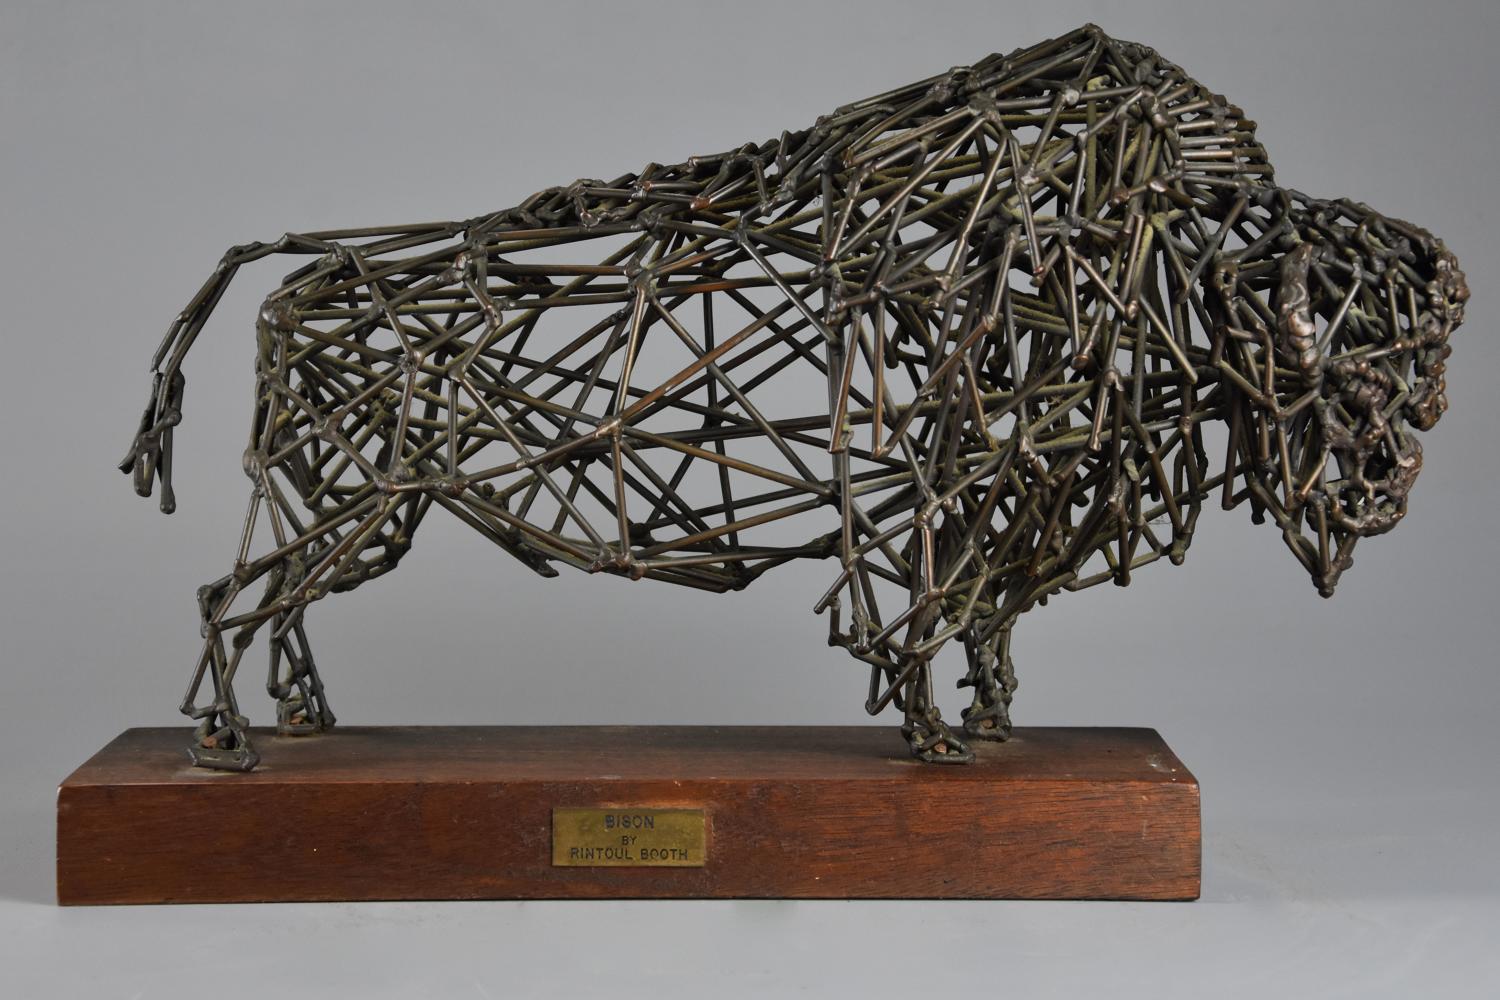 Bronze wirework sculpture of a ‘Bison' by Daniel Rintoul Booth